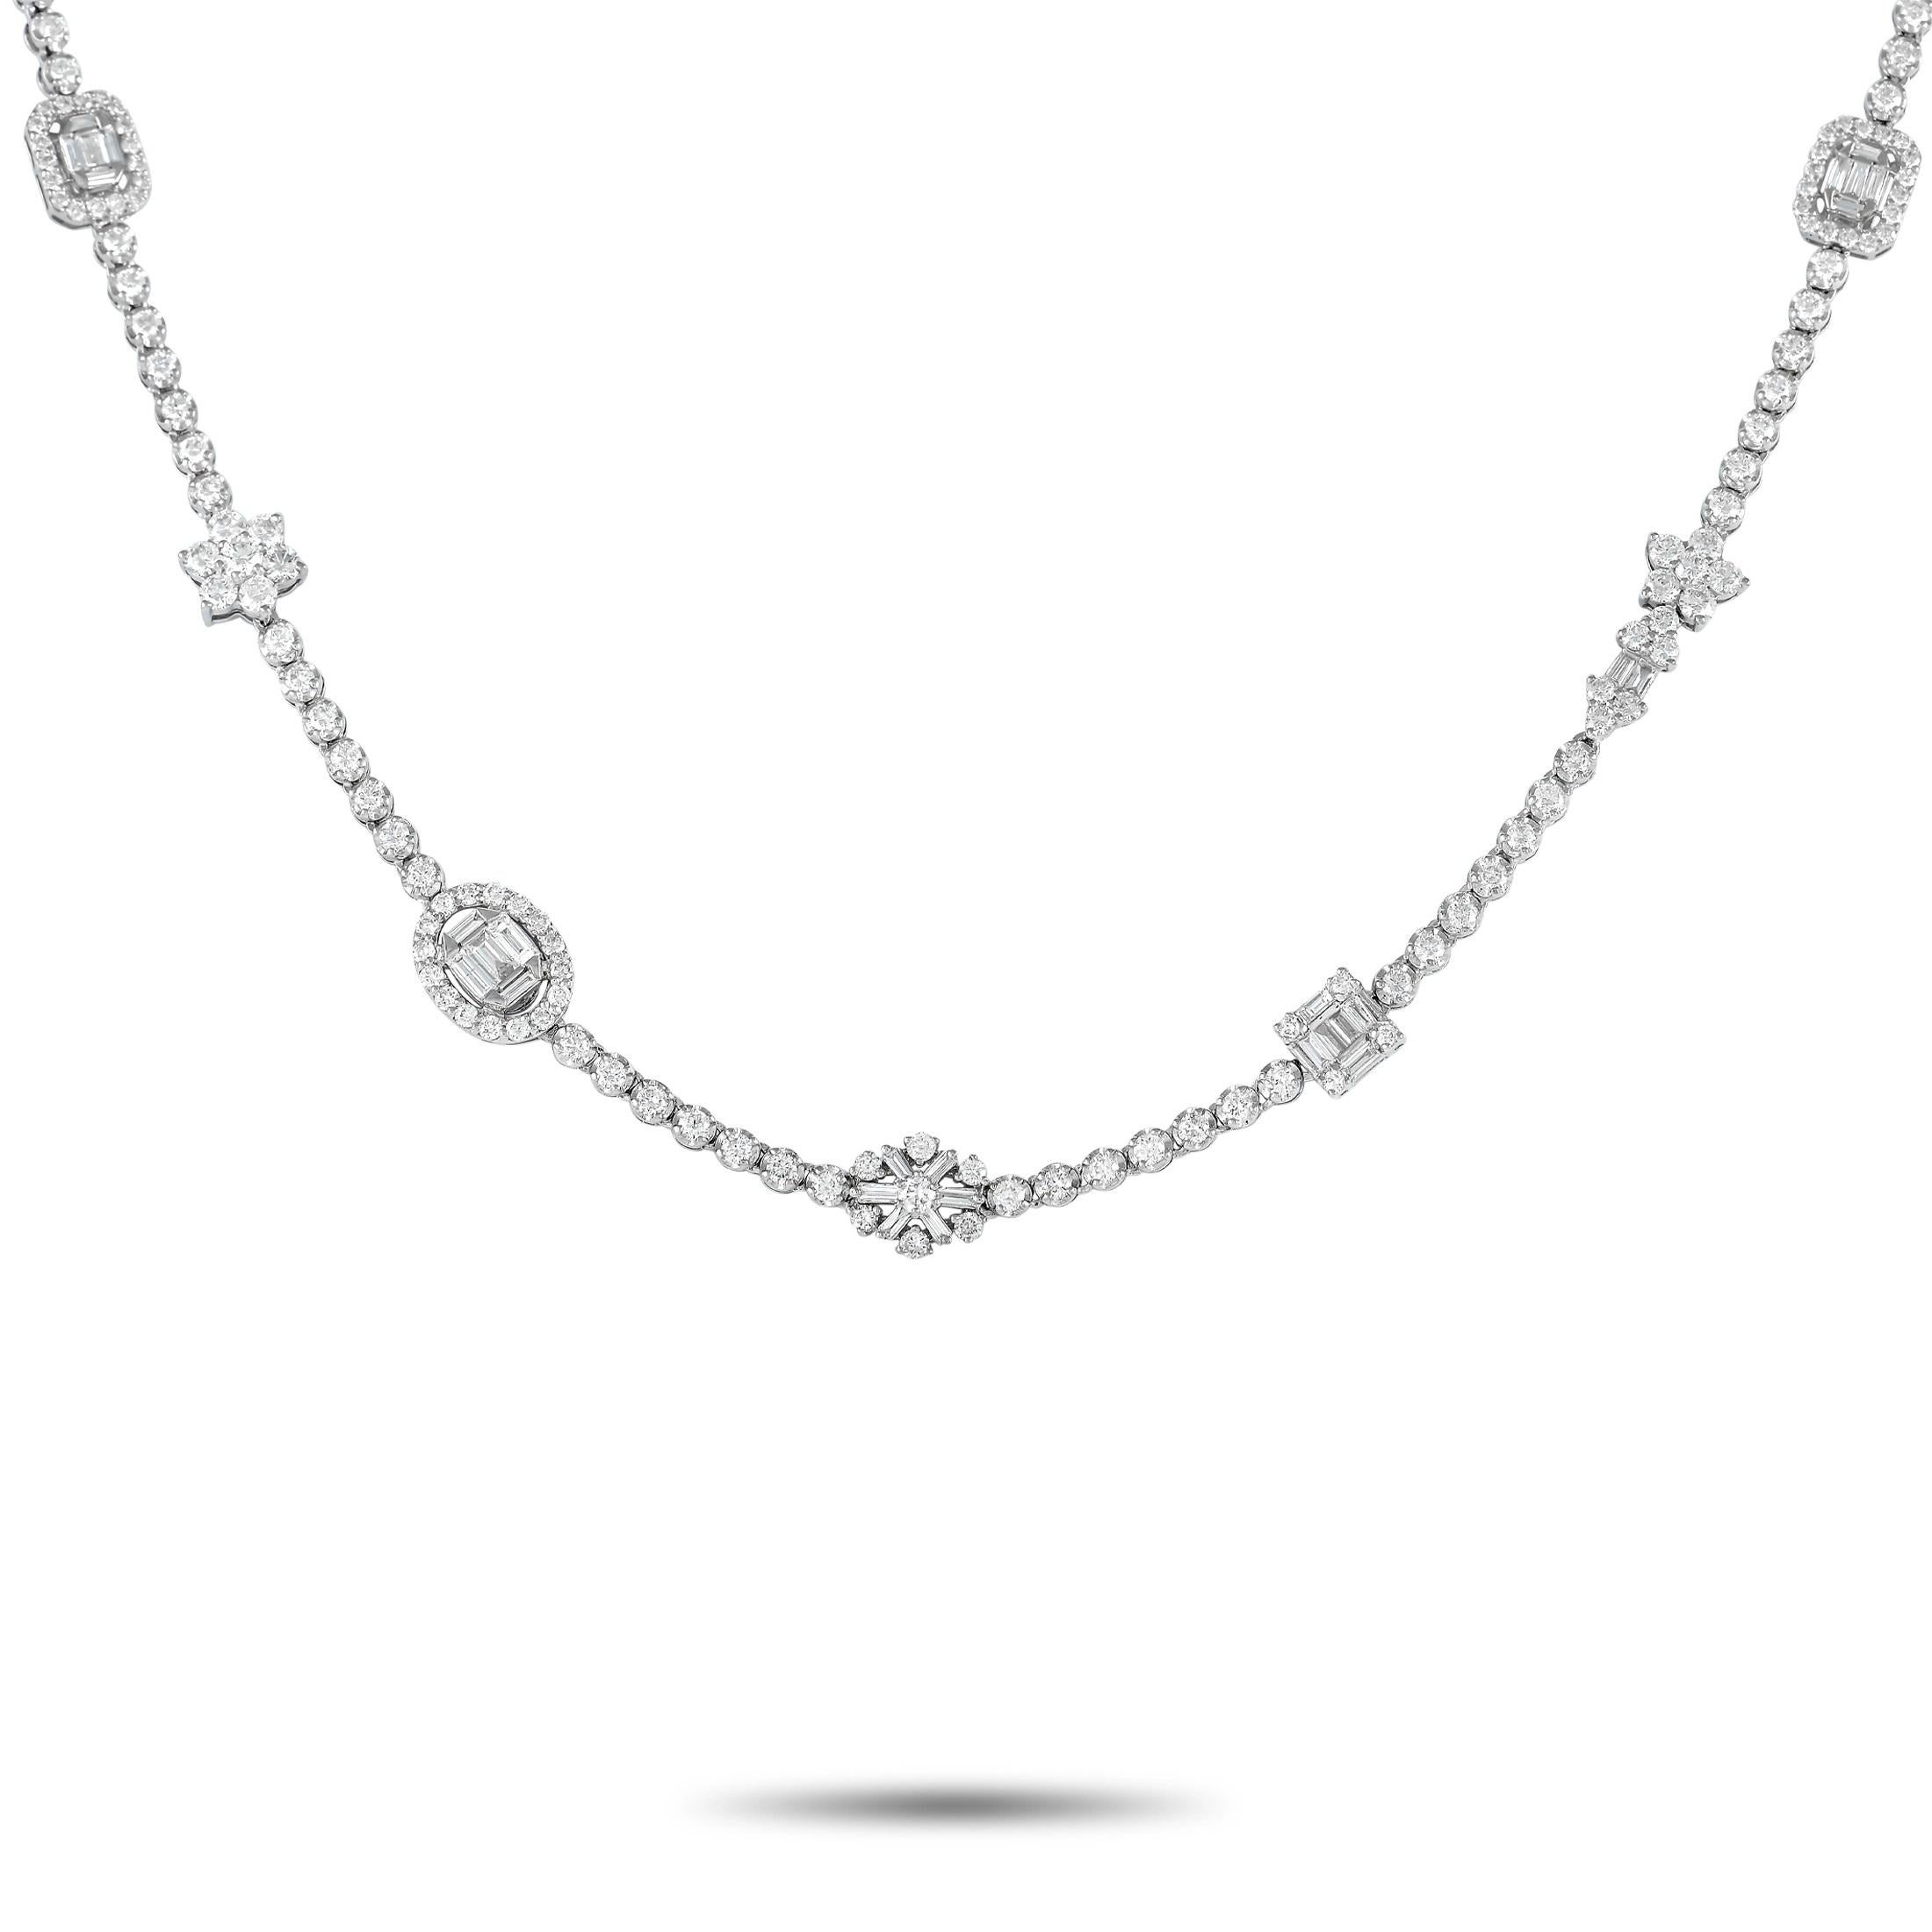 This lovely LB Exclusive necklace is a timeless piece. The necklace is made with 18K white gold and set with a single row of diamonds over its length. The chain is also punctuated with evenly spaced diamond clusters for a total of 12.15 carats of